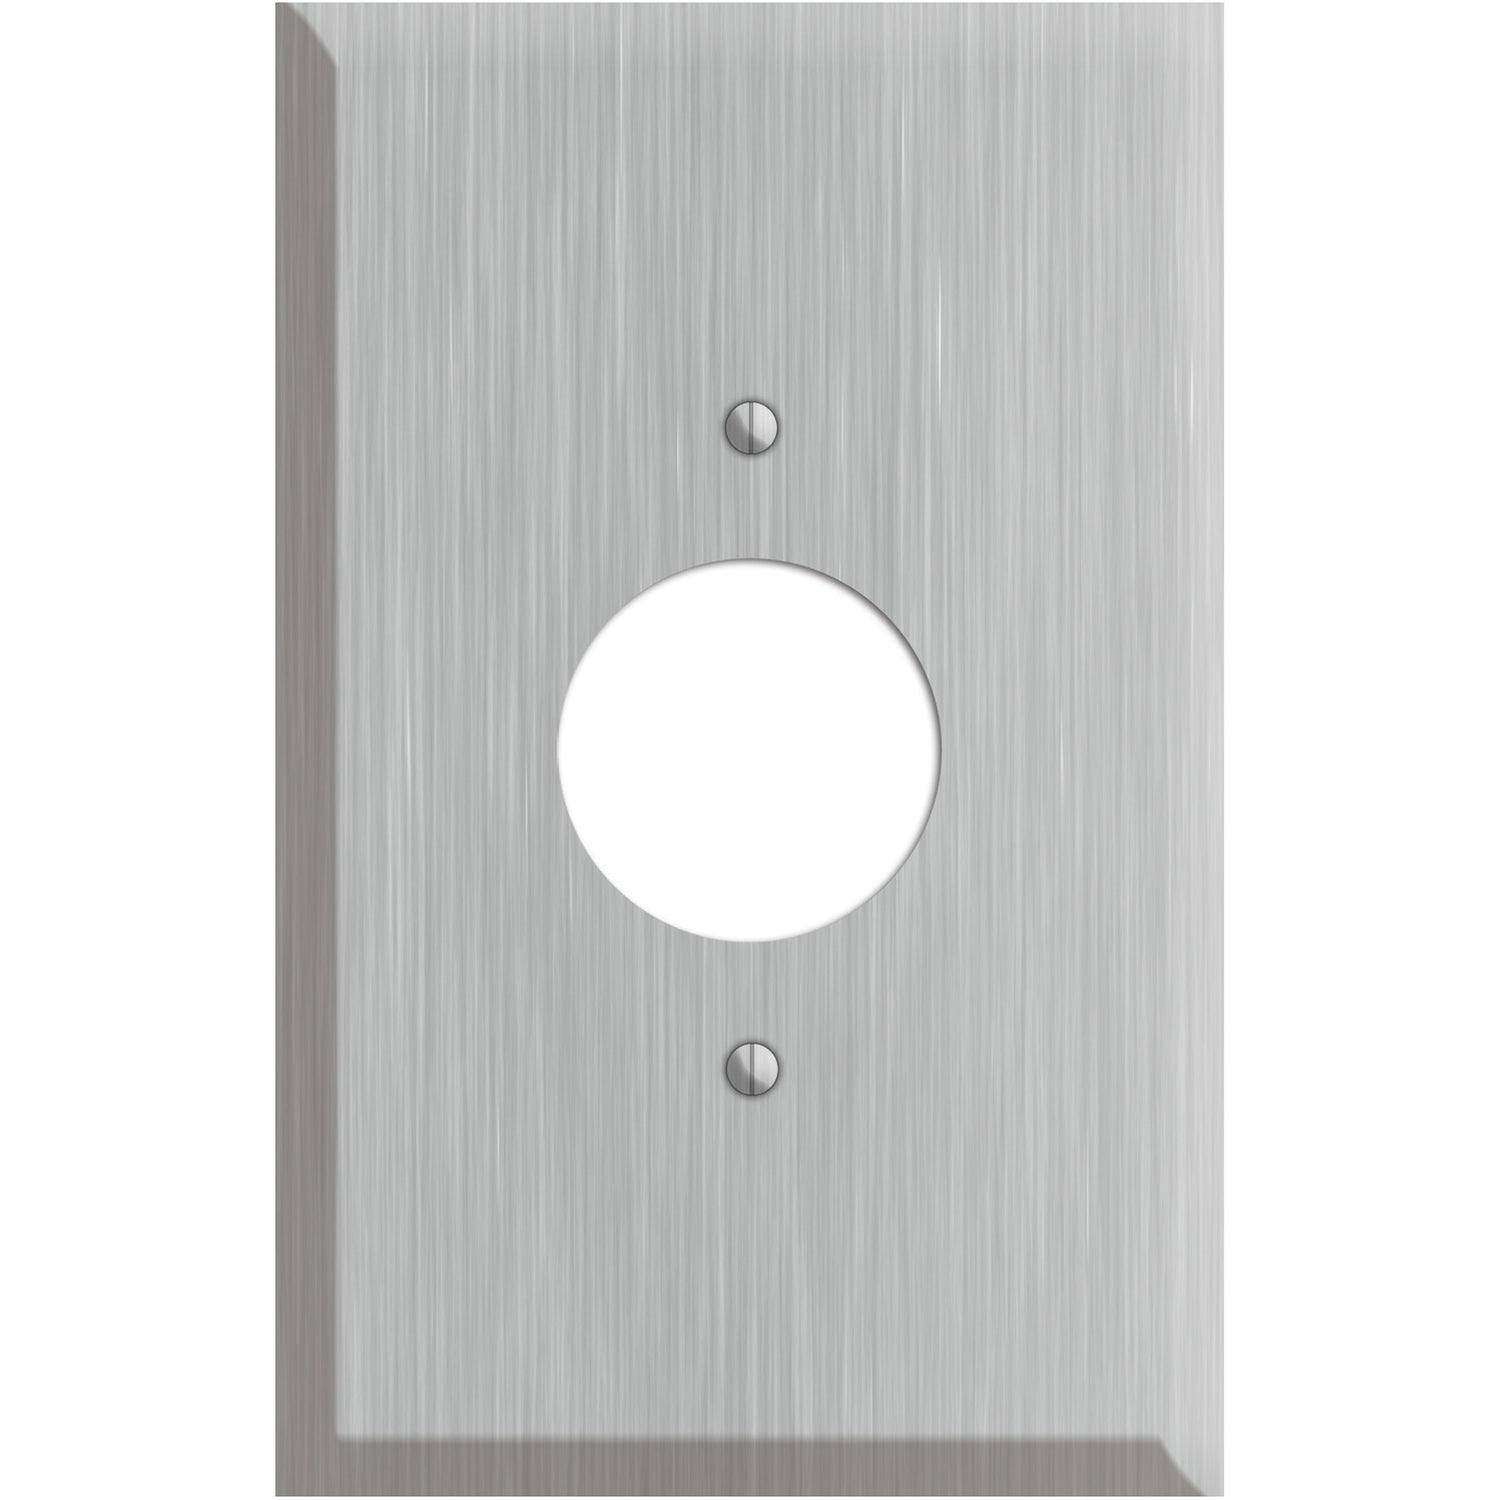 Oversized Discontinued Stainless Steel Single Receptacle Wallplate